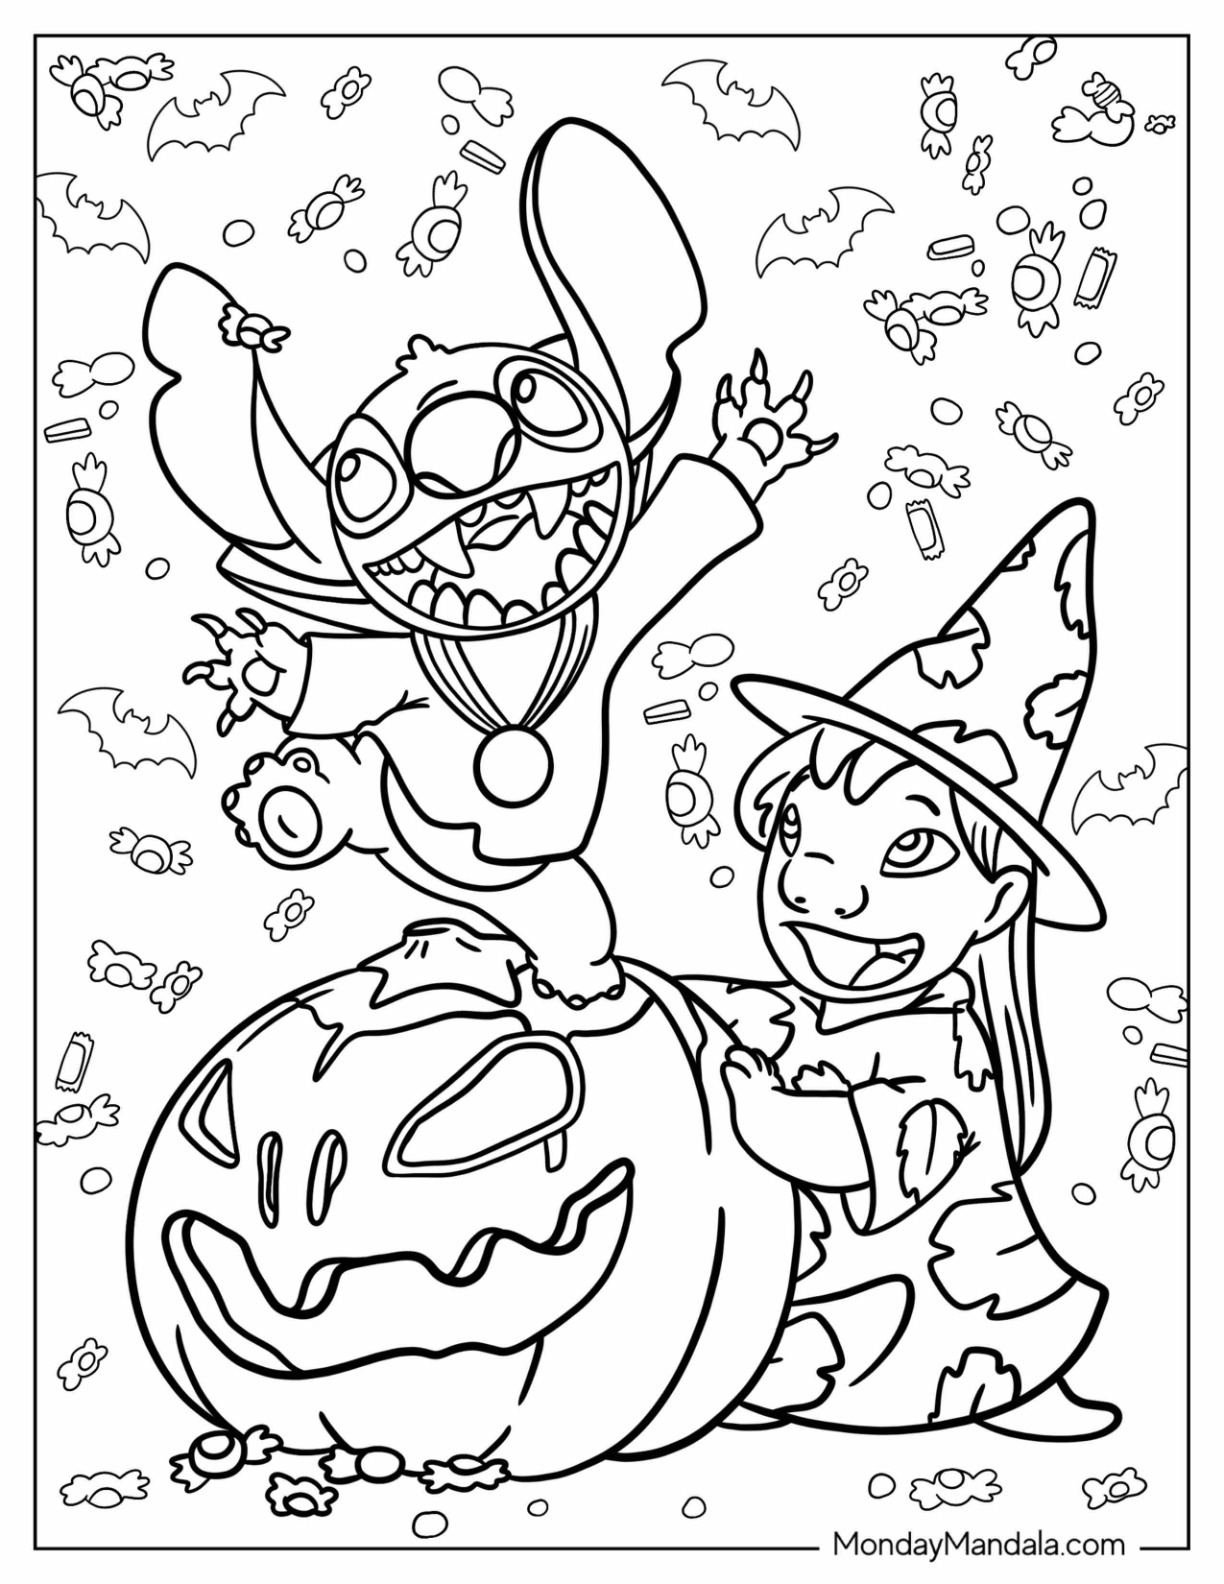 24 Disney Halloween Coloring Pages (Free PDF Printables)